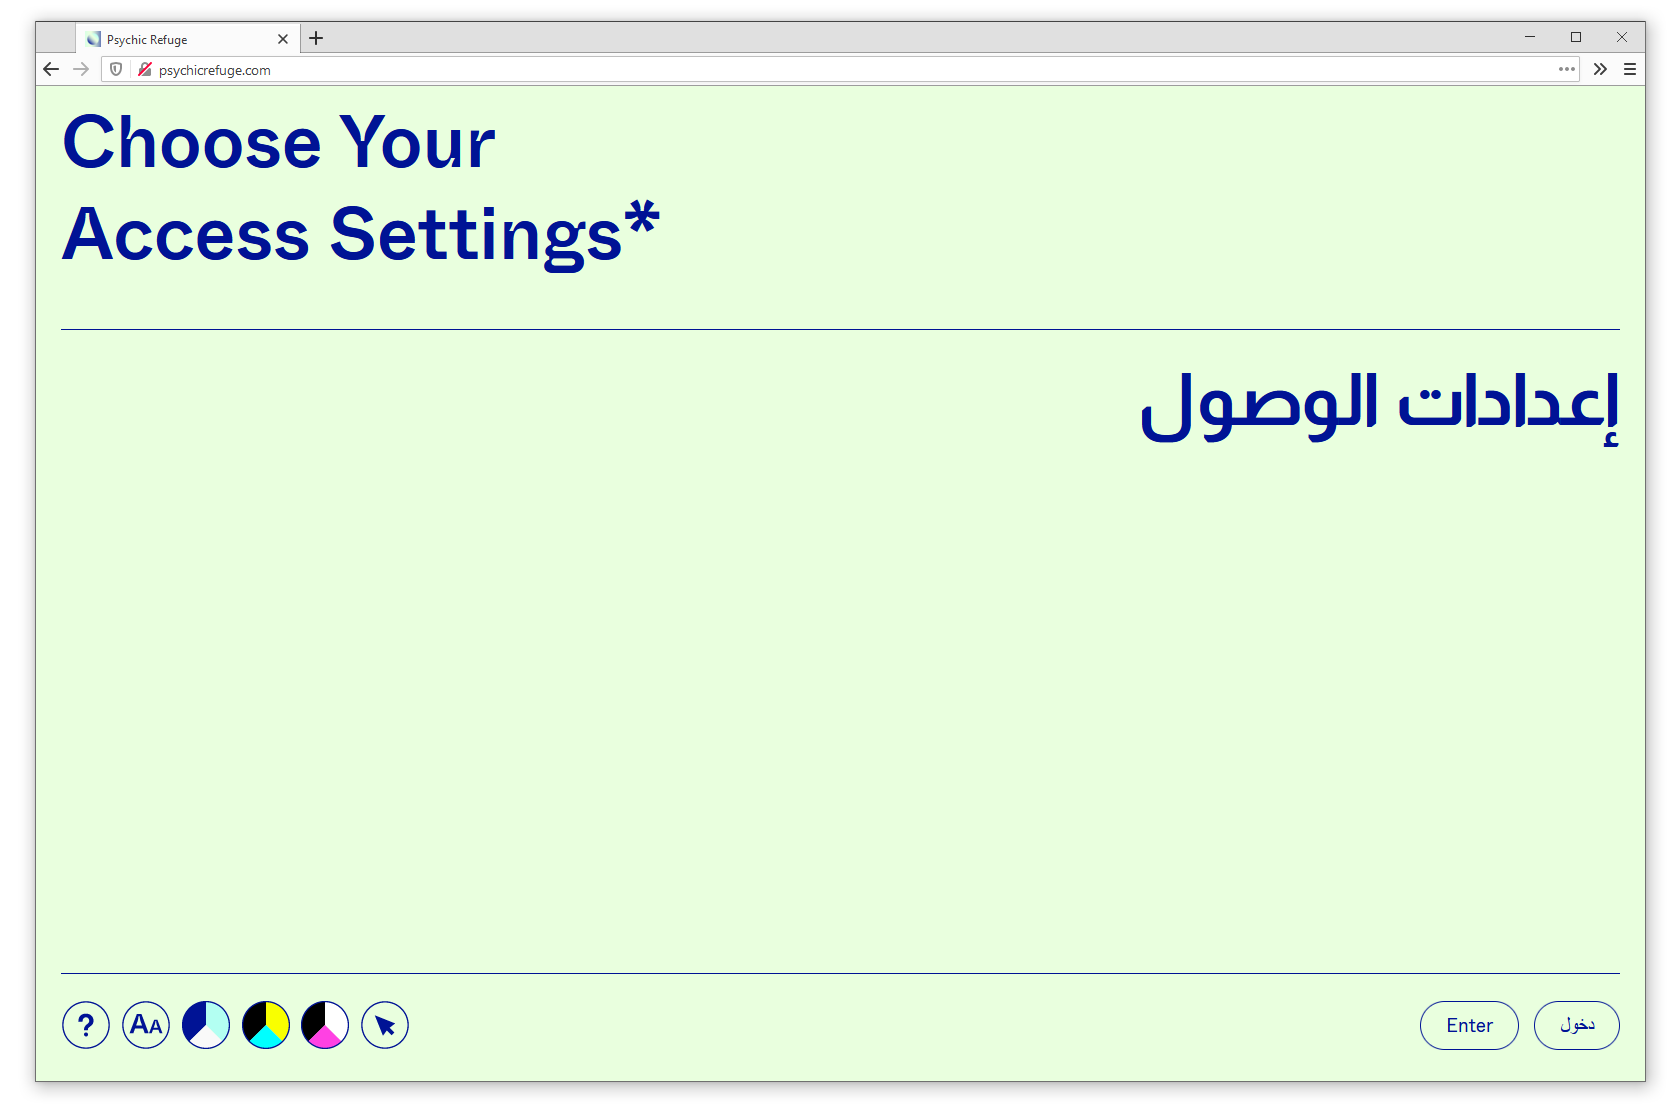 Browser window shows access settings page on psychicrefuge.com. Blue text on mint background reads 'Choose your Access Settings' in English and Arabic. Buttons to change fonts, colours, and display language are visible at the bottom of the screen.